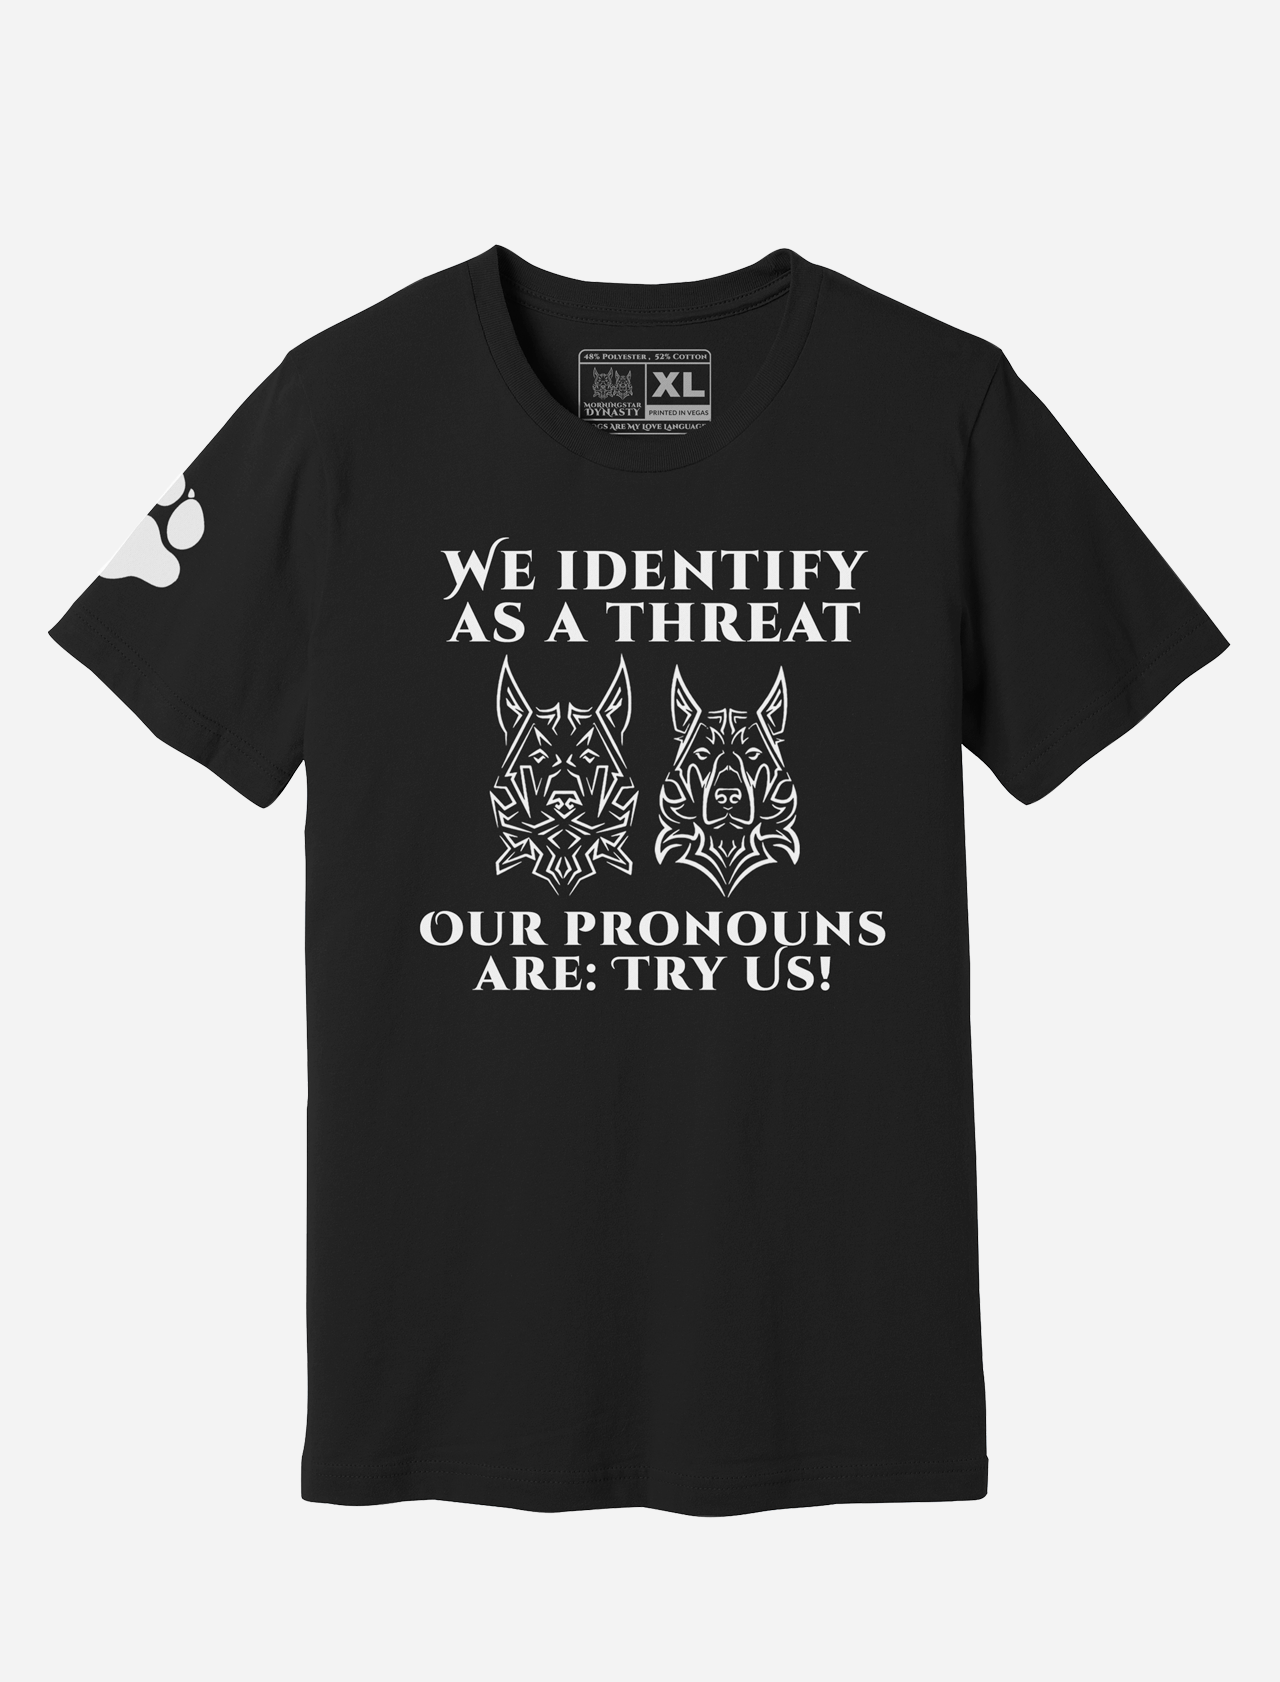 TRY US T-Shirt